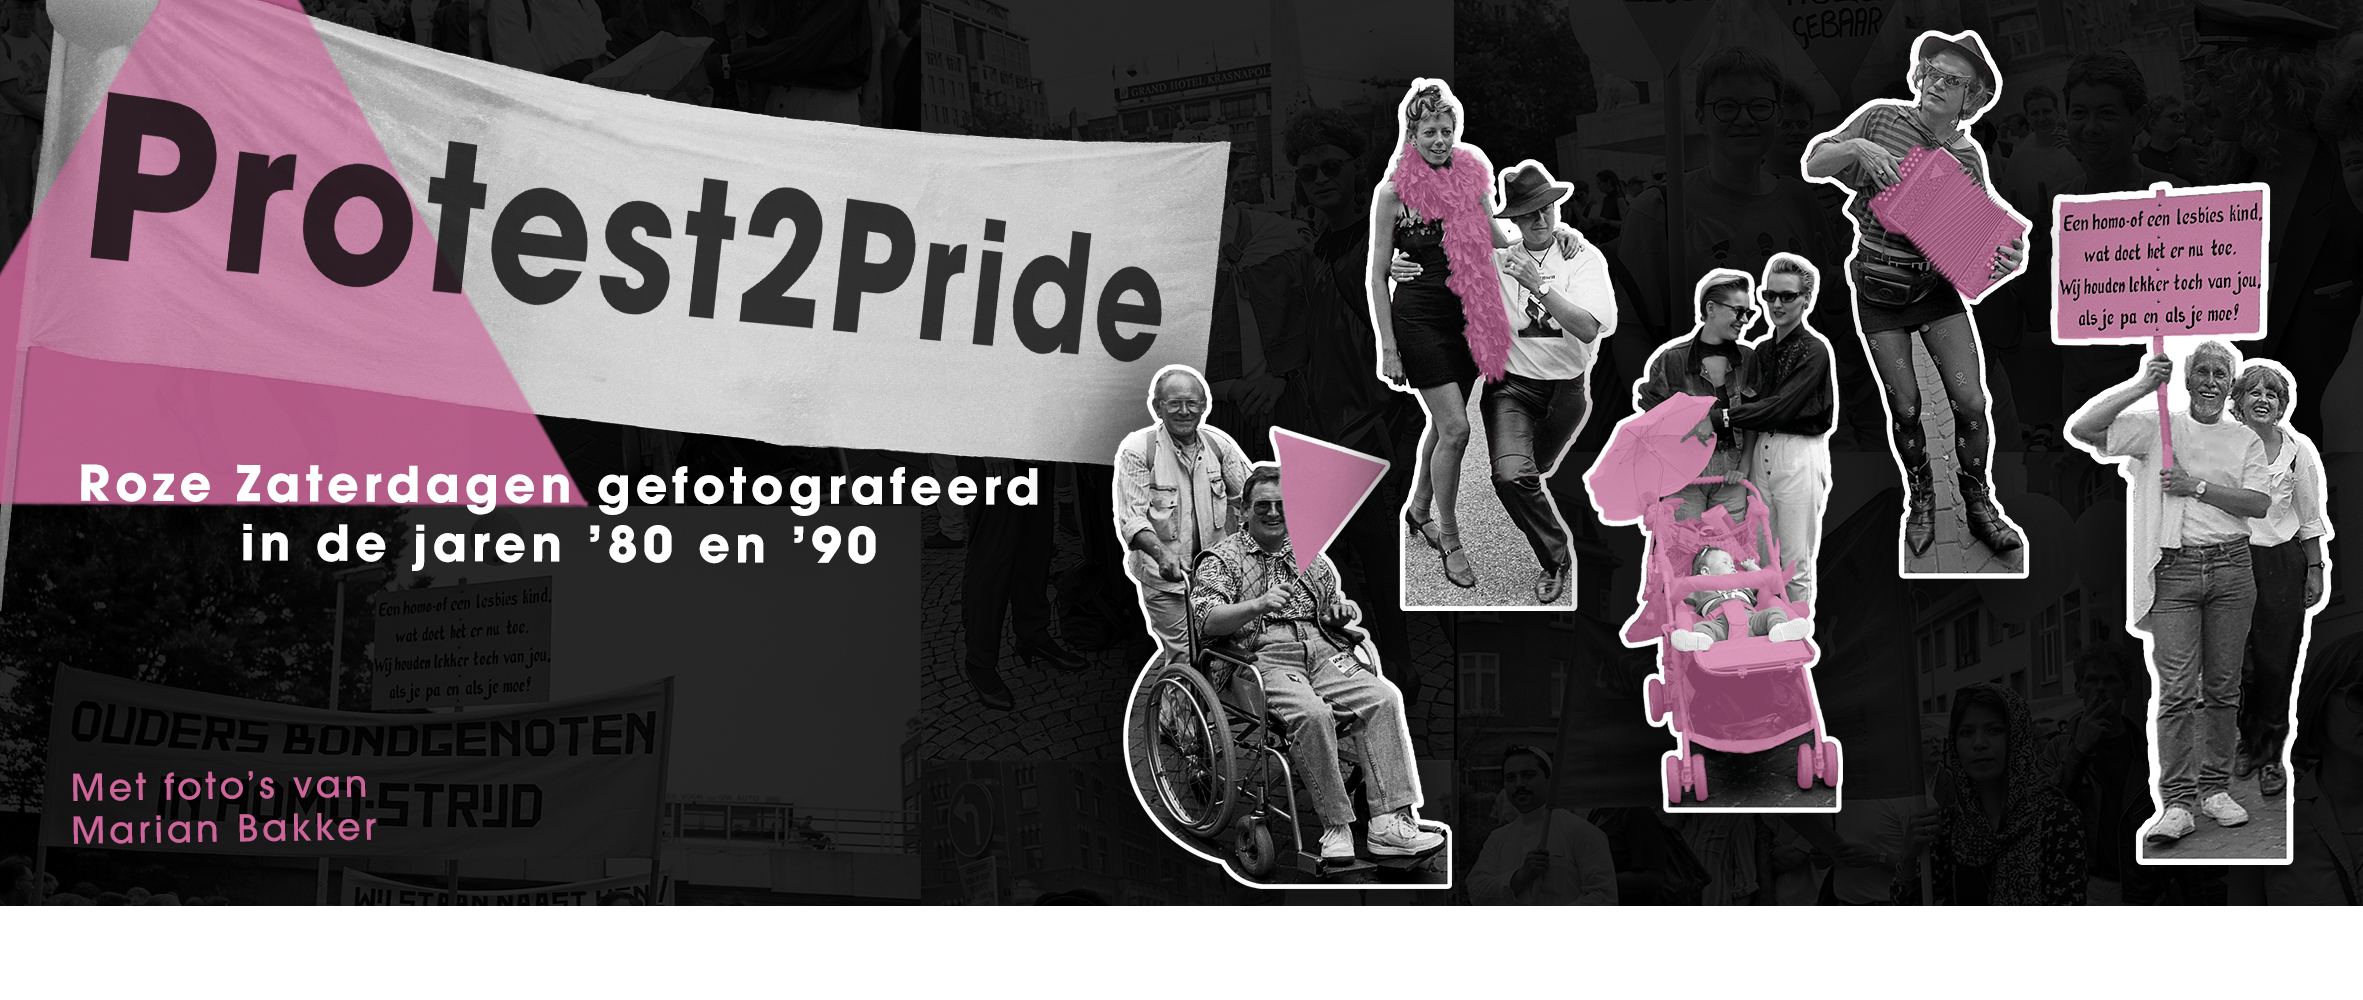 Protest2Pride. Pink Saturdays of the 80s and 90s